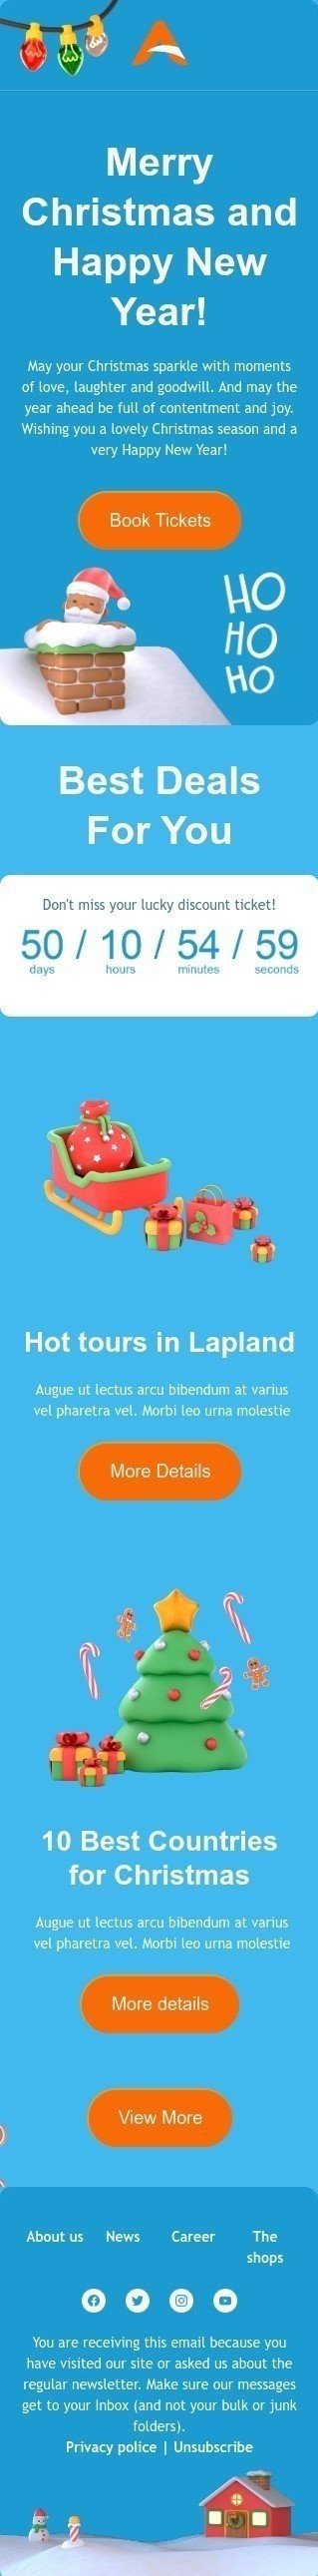 Christmas email template "Hot tours in Lapland" for airline industry mobile view